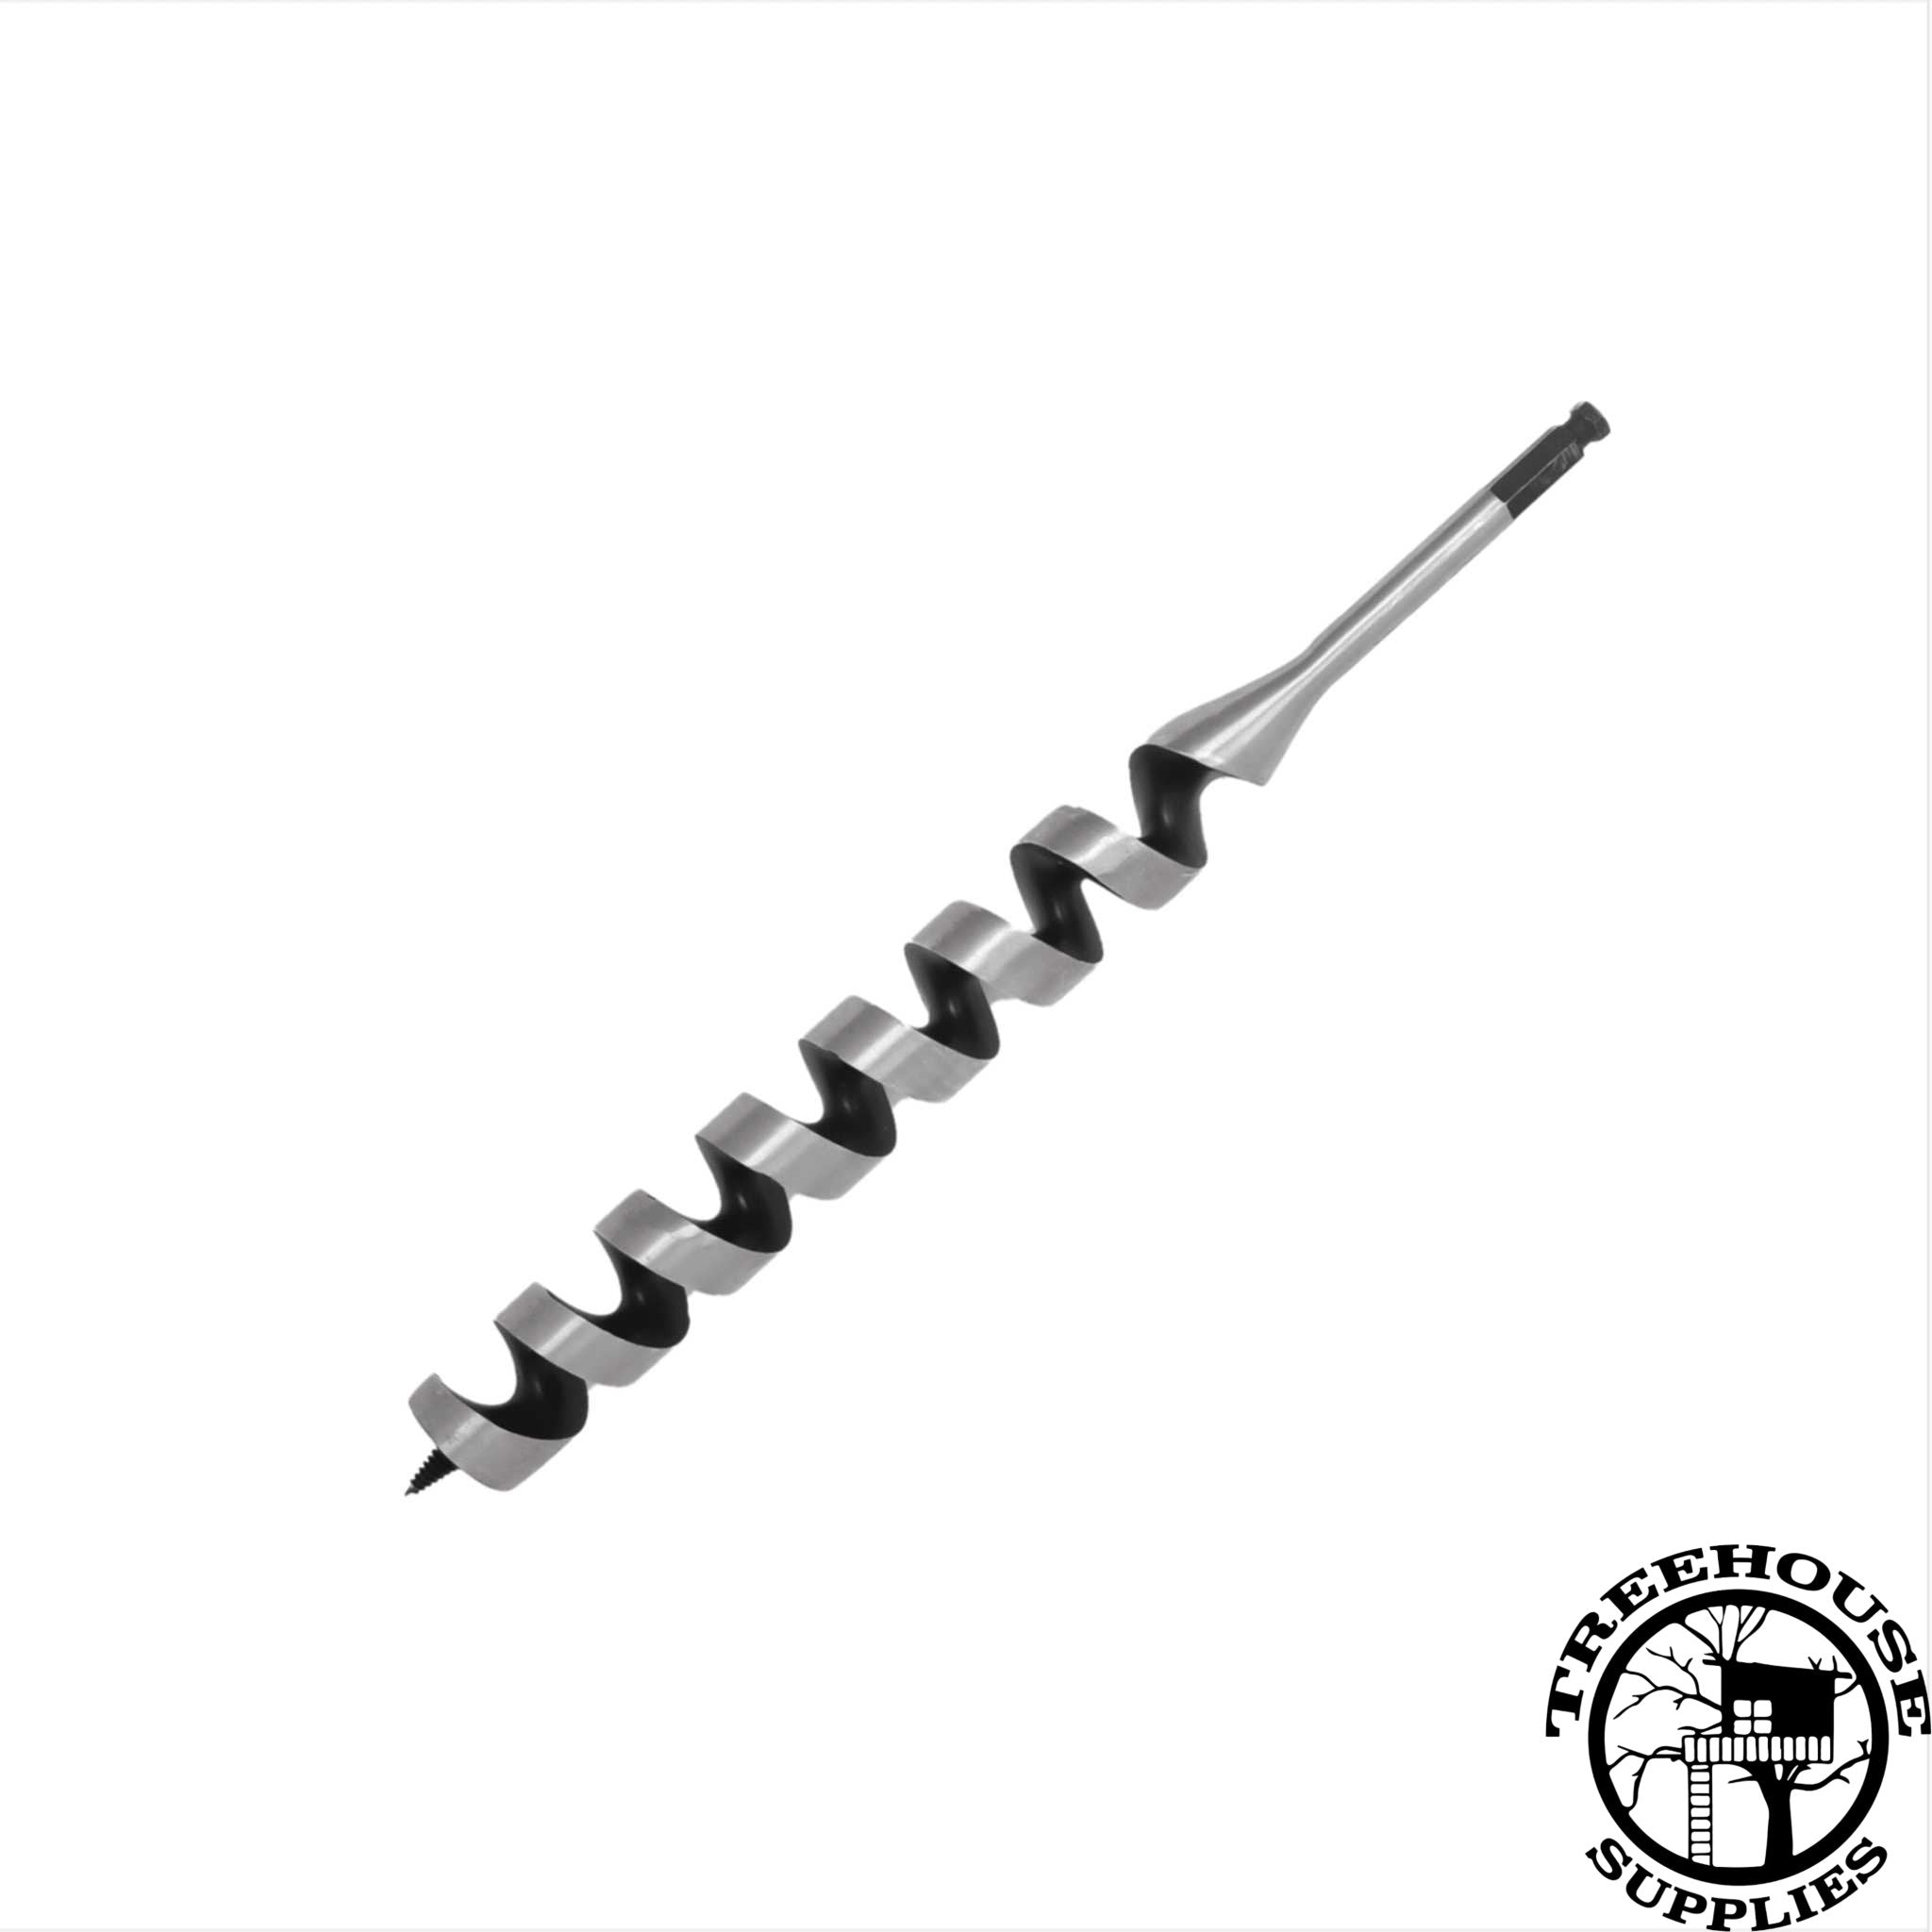 Image of metallic silver 1-5/8" Ship Auger Bit. Used to drill for heavy duty bolts. White Background.